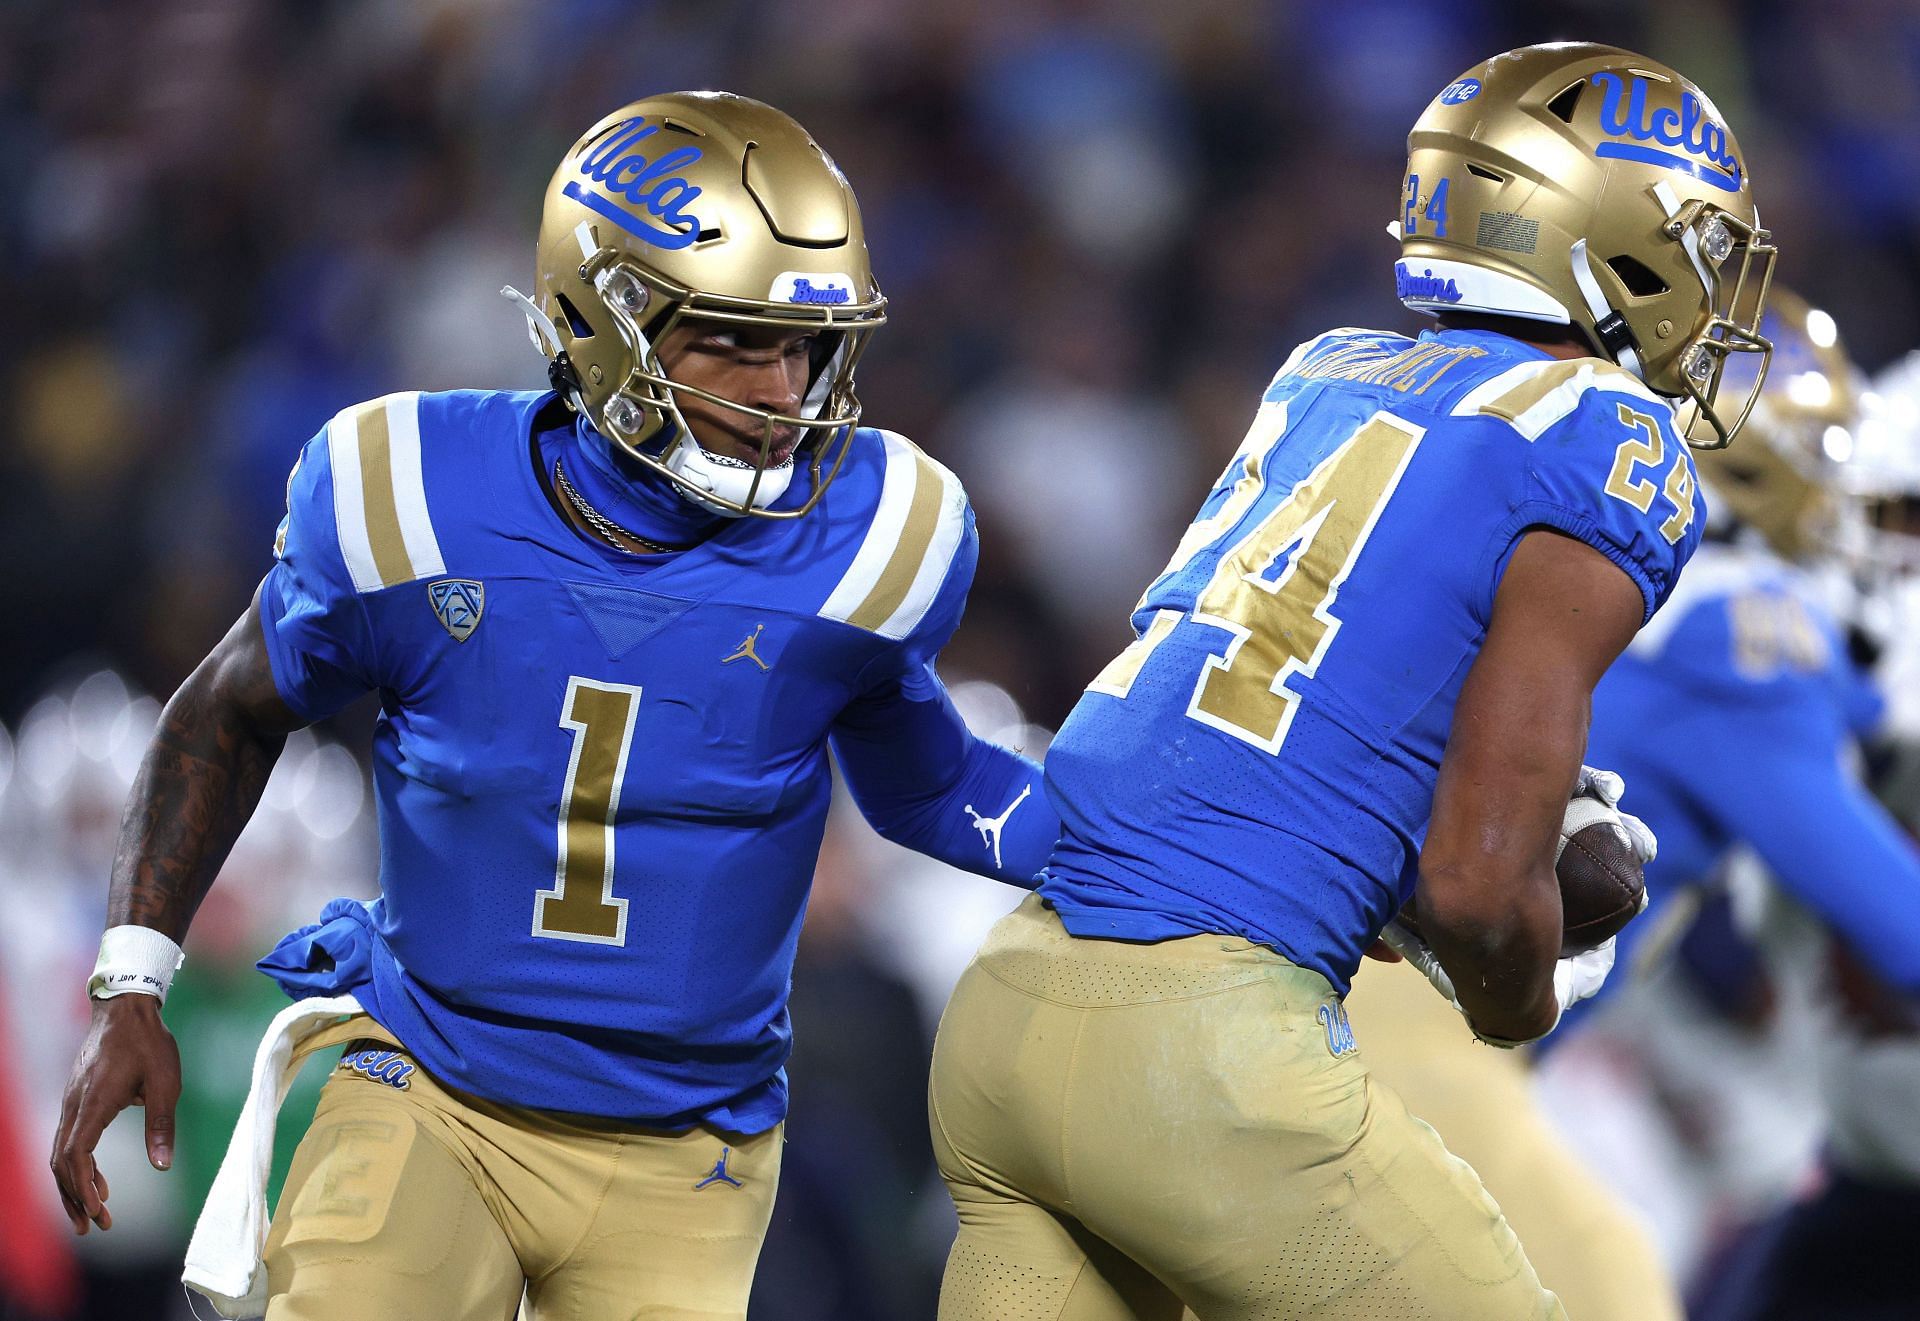 Dorian Thompson-Robinson #1 of the UCLA Bruins runs a draw to Zach Charbonnet #24 against the Arizona Wildcats